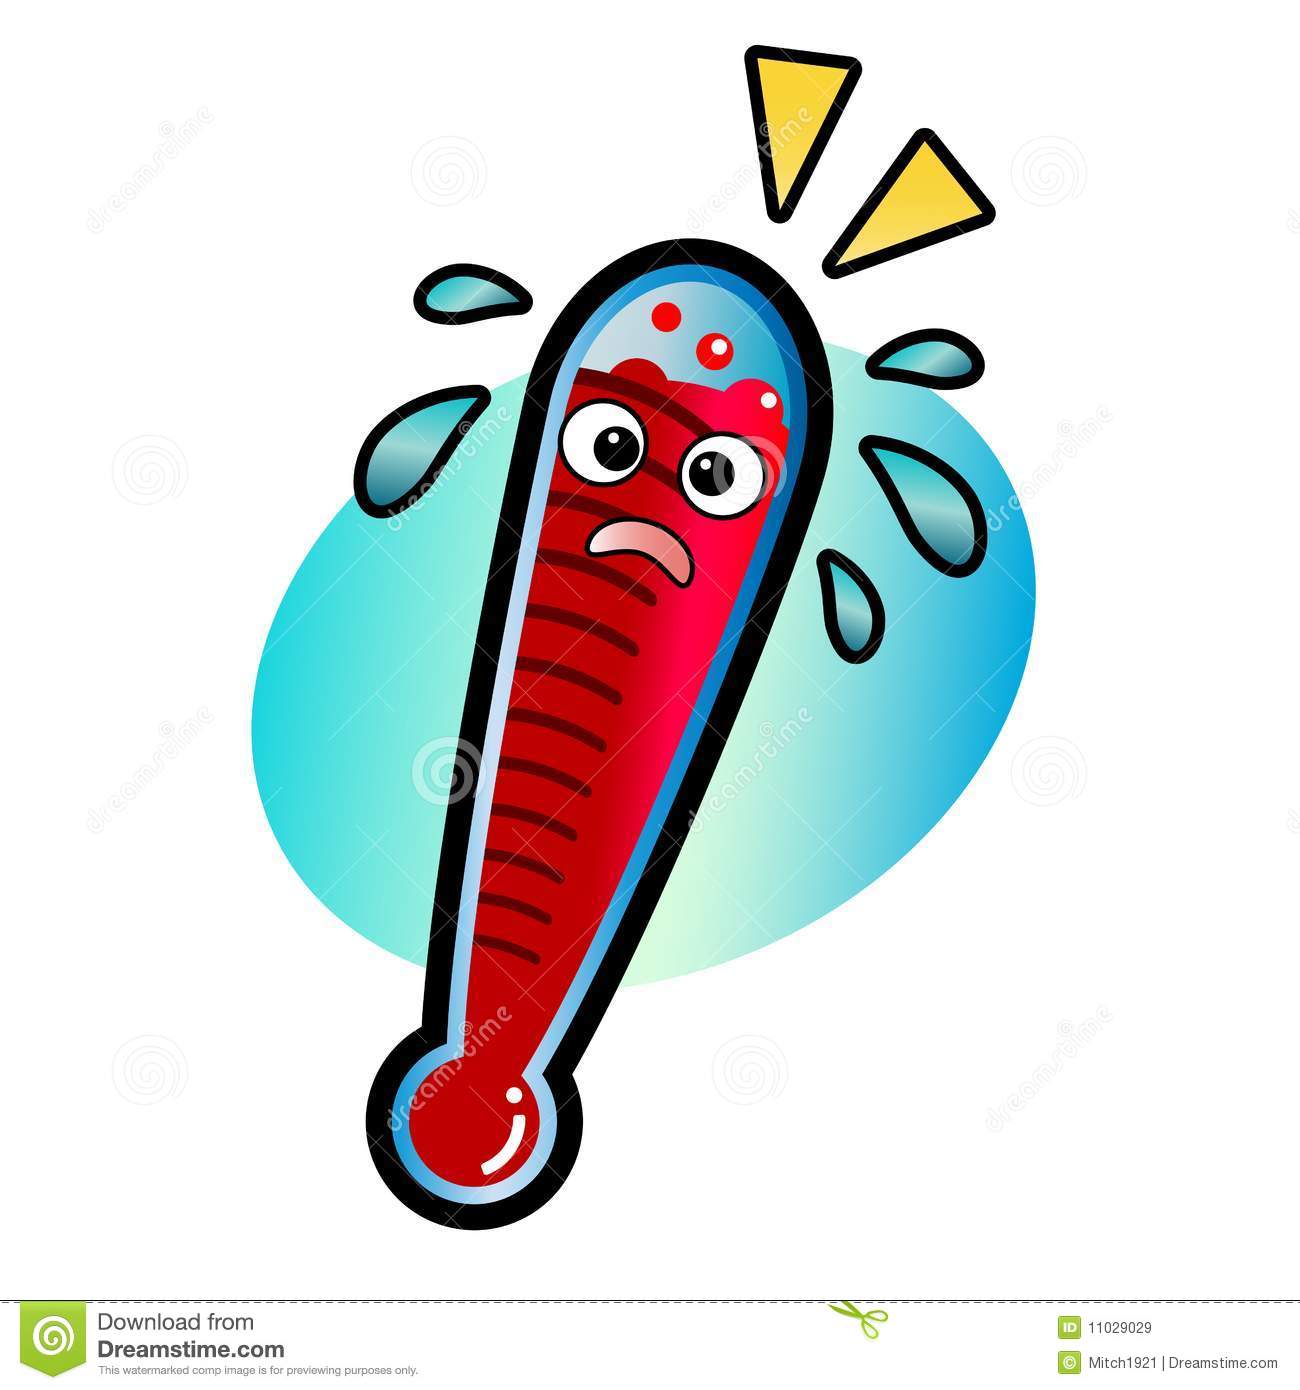 Hot Thermometer Cartoon Vector Illustration Isolated On White